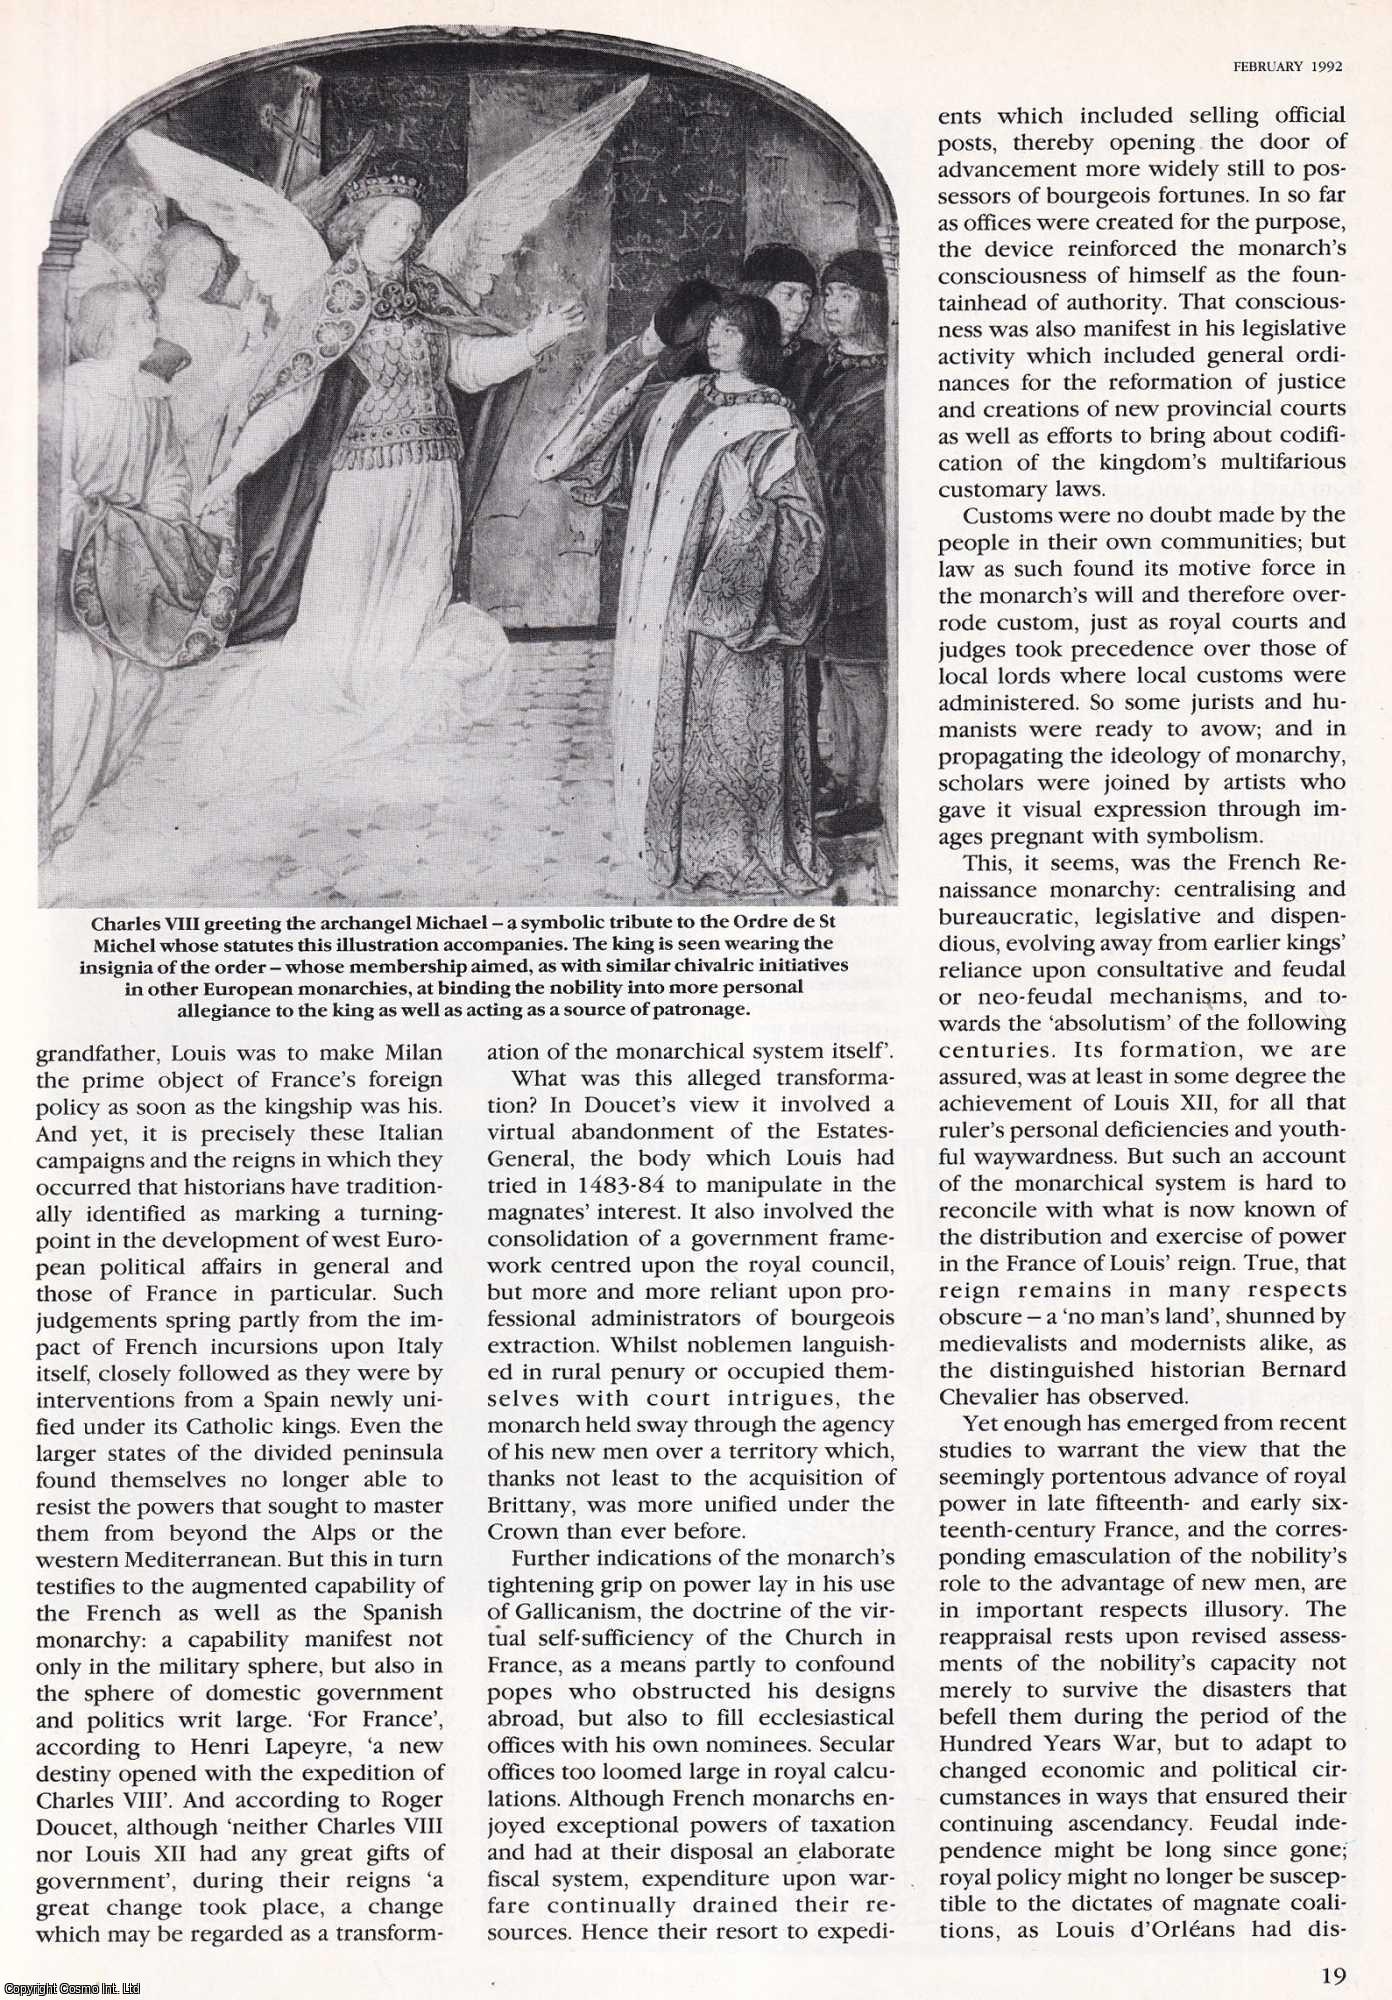 Howell Lloyd - Louis XII: Medieval King or Renaissance Monarch. An original article from History Today, 1992.